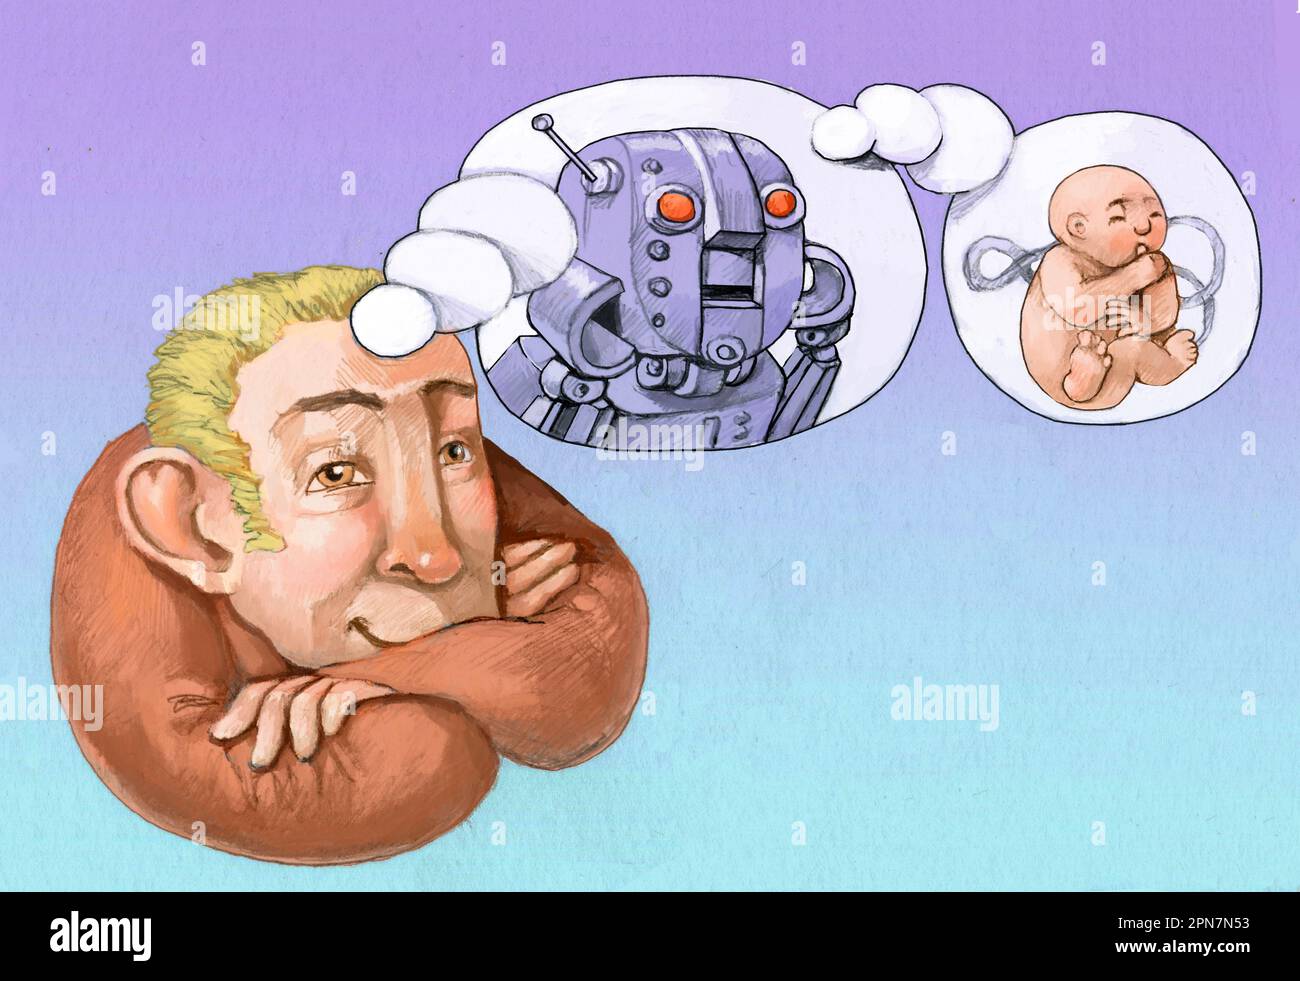 a man dreams of a robot who in turn dreams of a child, a metaphor for technology that aspires to be human Stock Photo